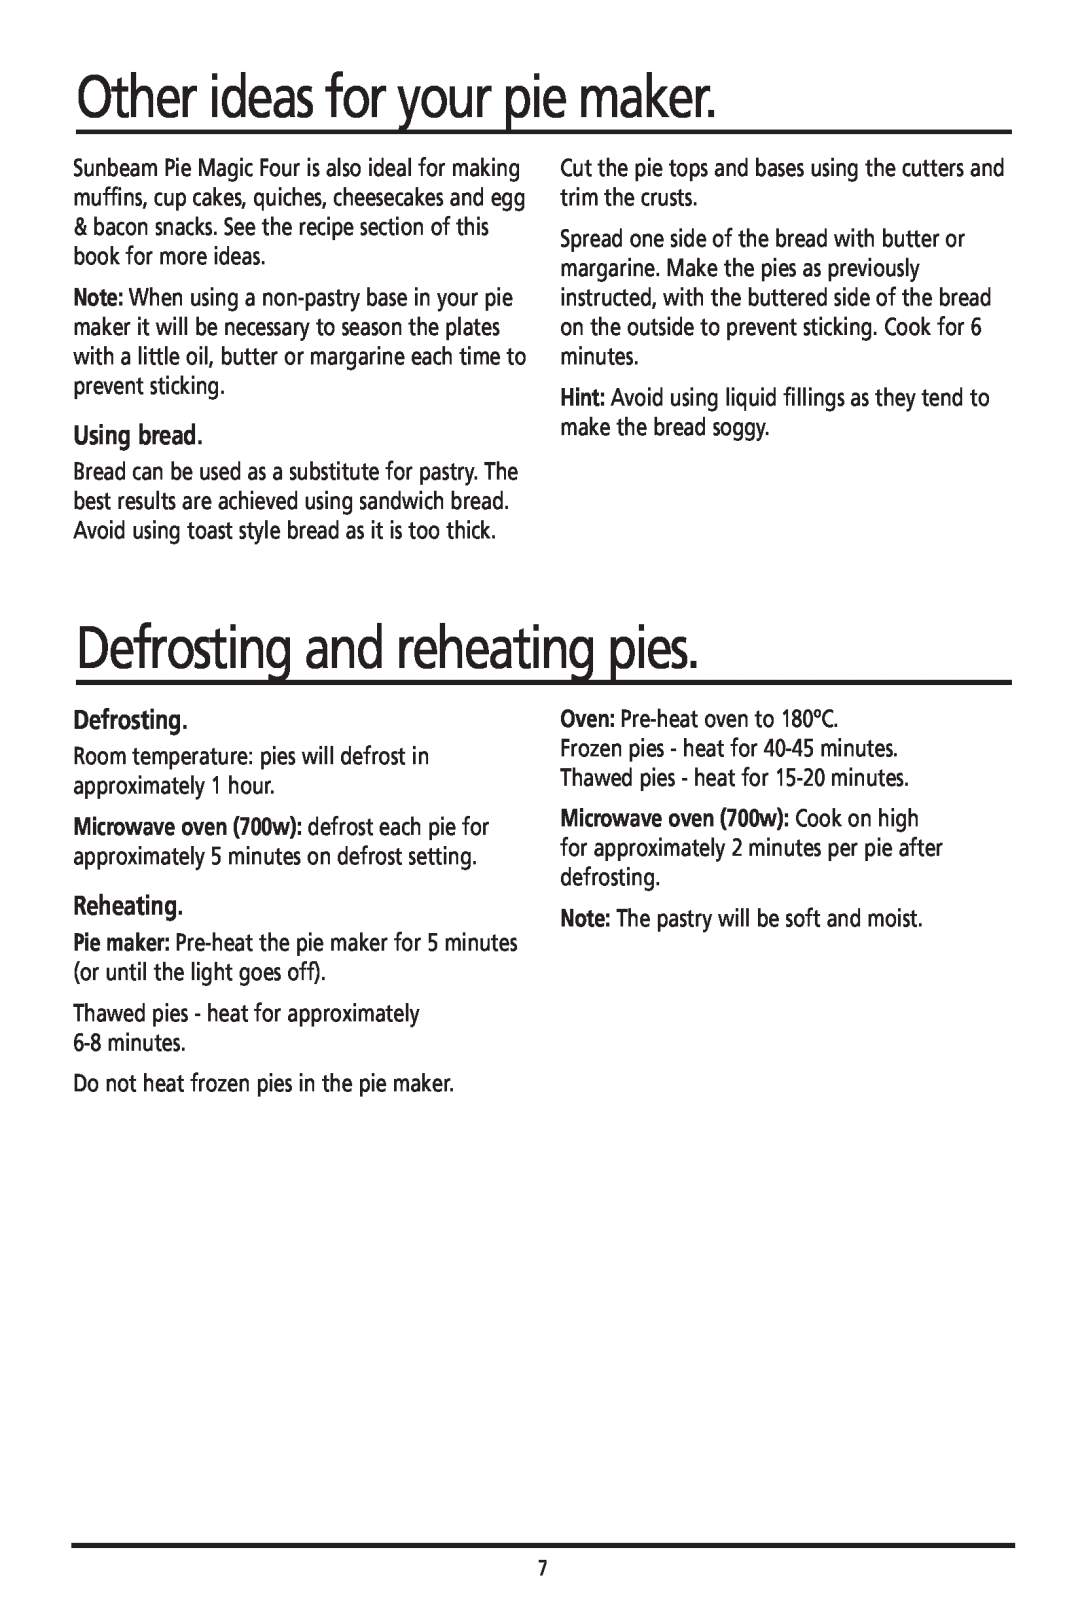 Sunbeam PM040 manual Other ideas for your pie maker, Defrosting and reheating pies, Using bread, Reheating 